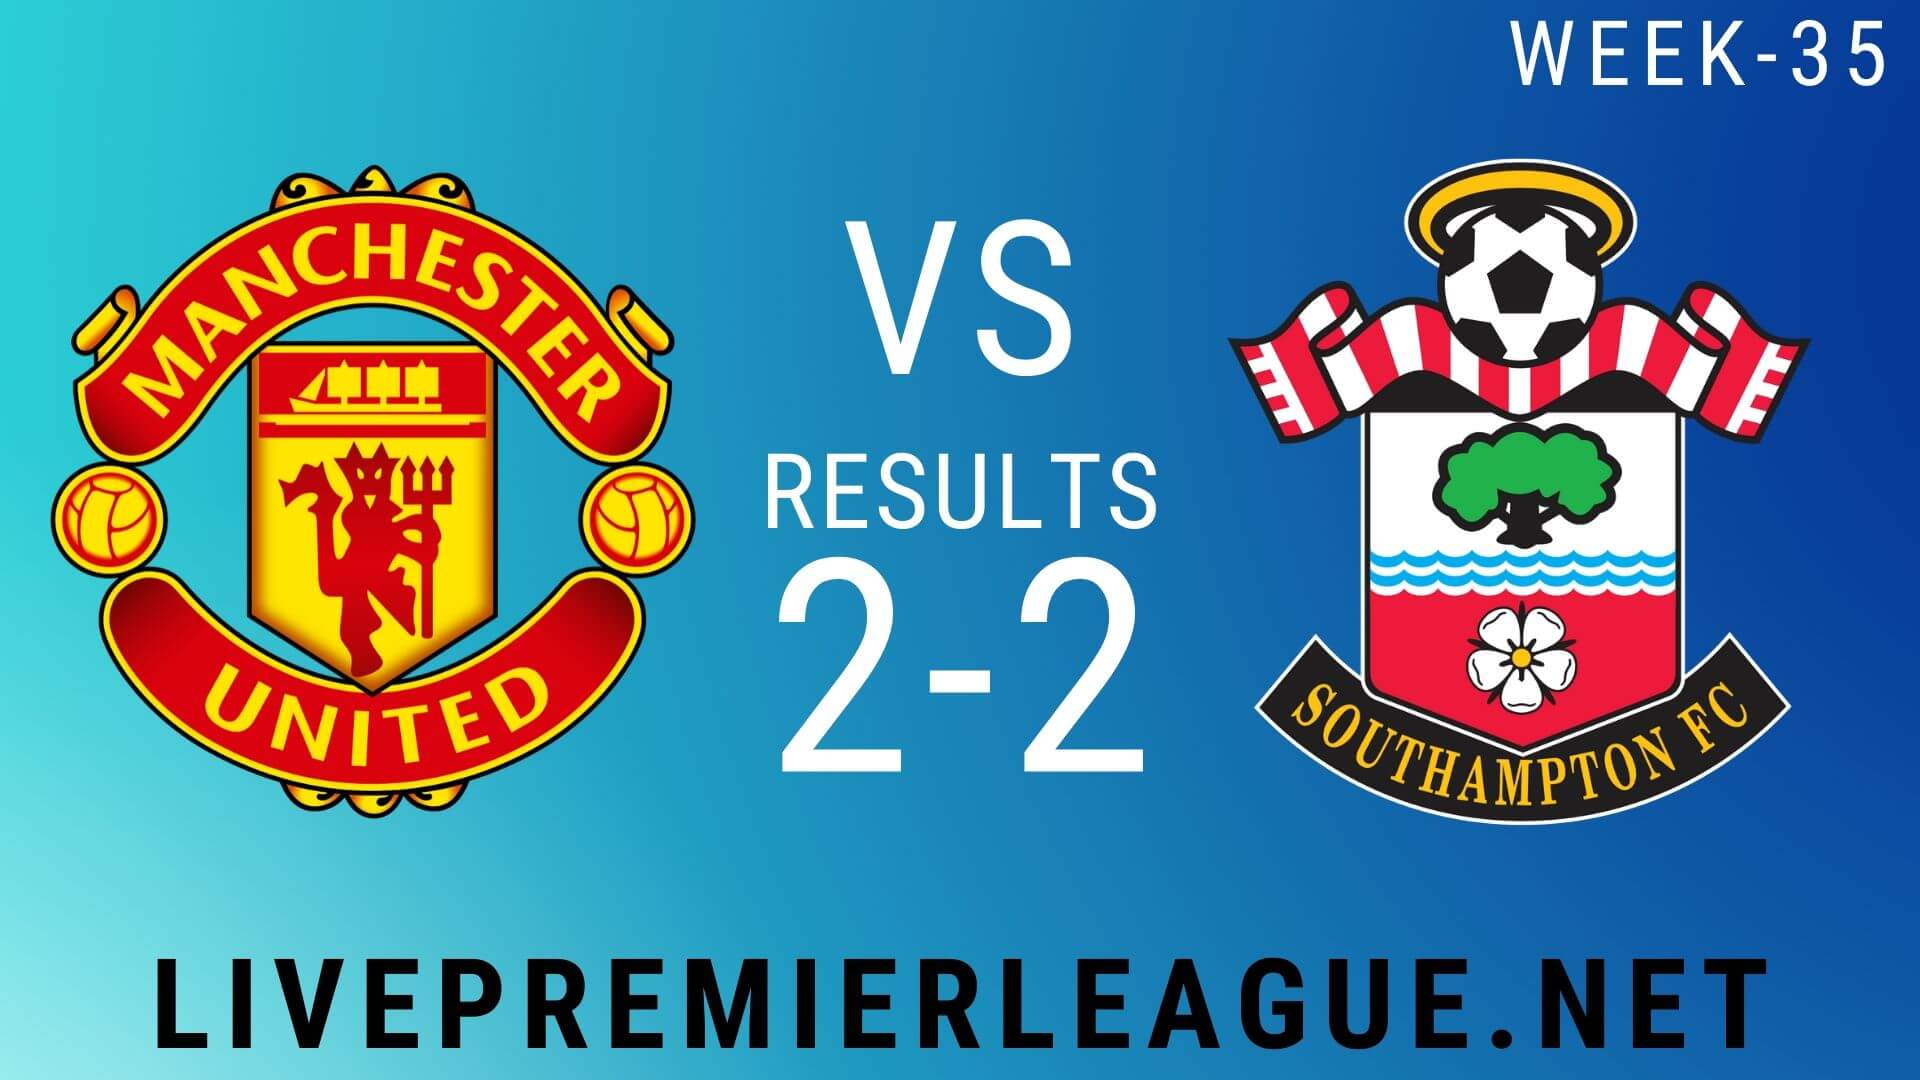 Manchester United Vs Southampton | Week 35 Result 2020